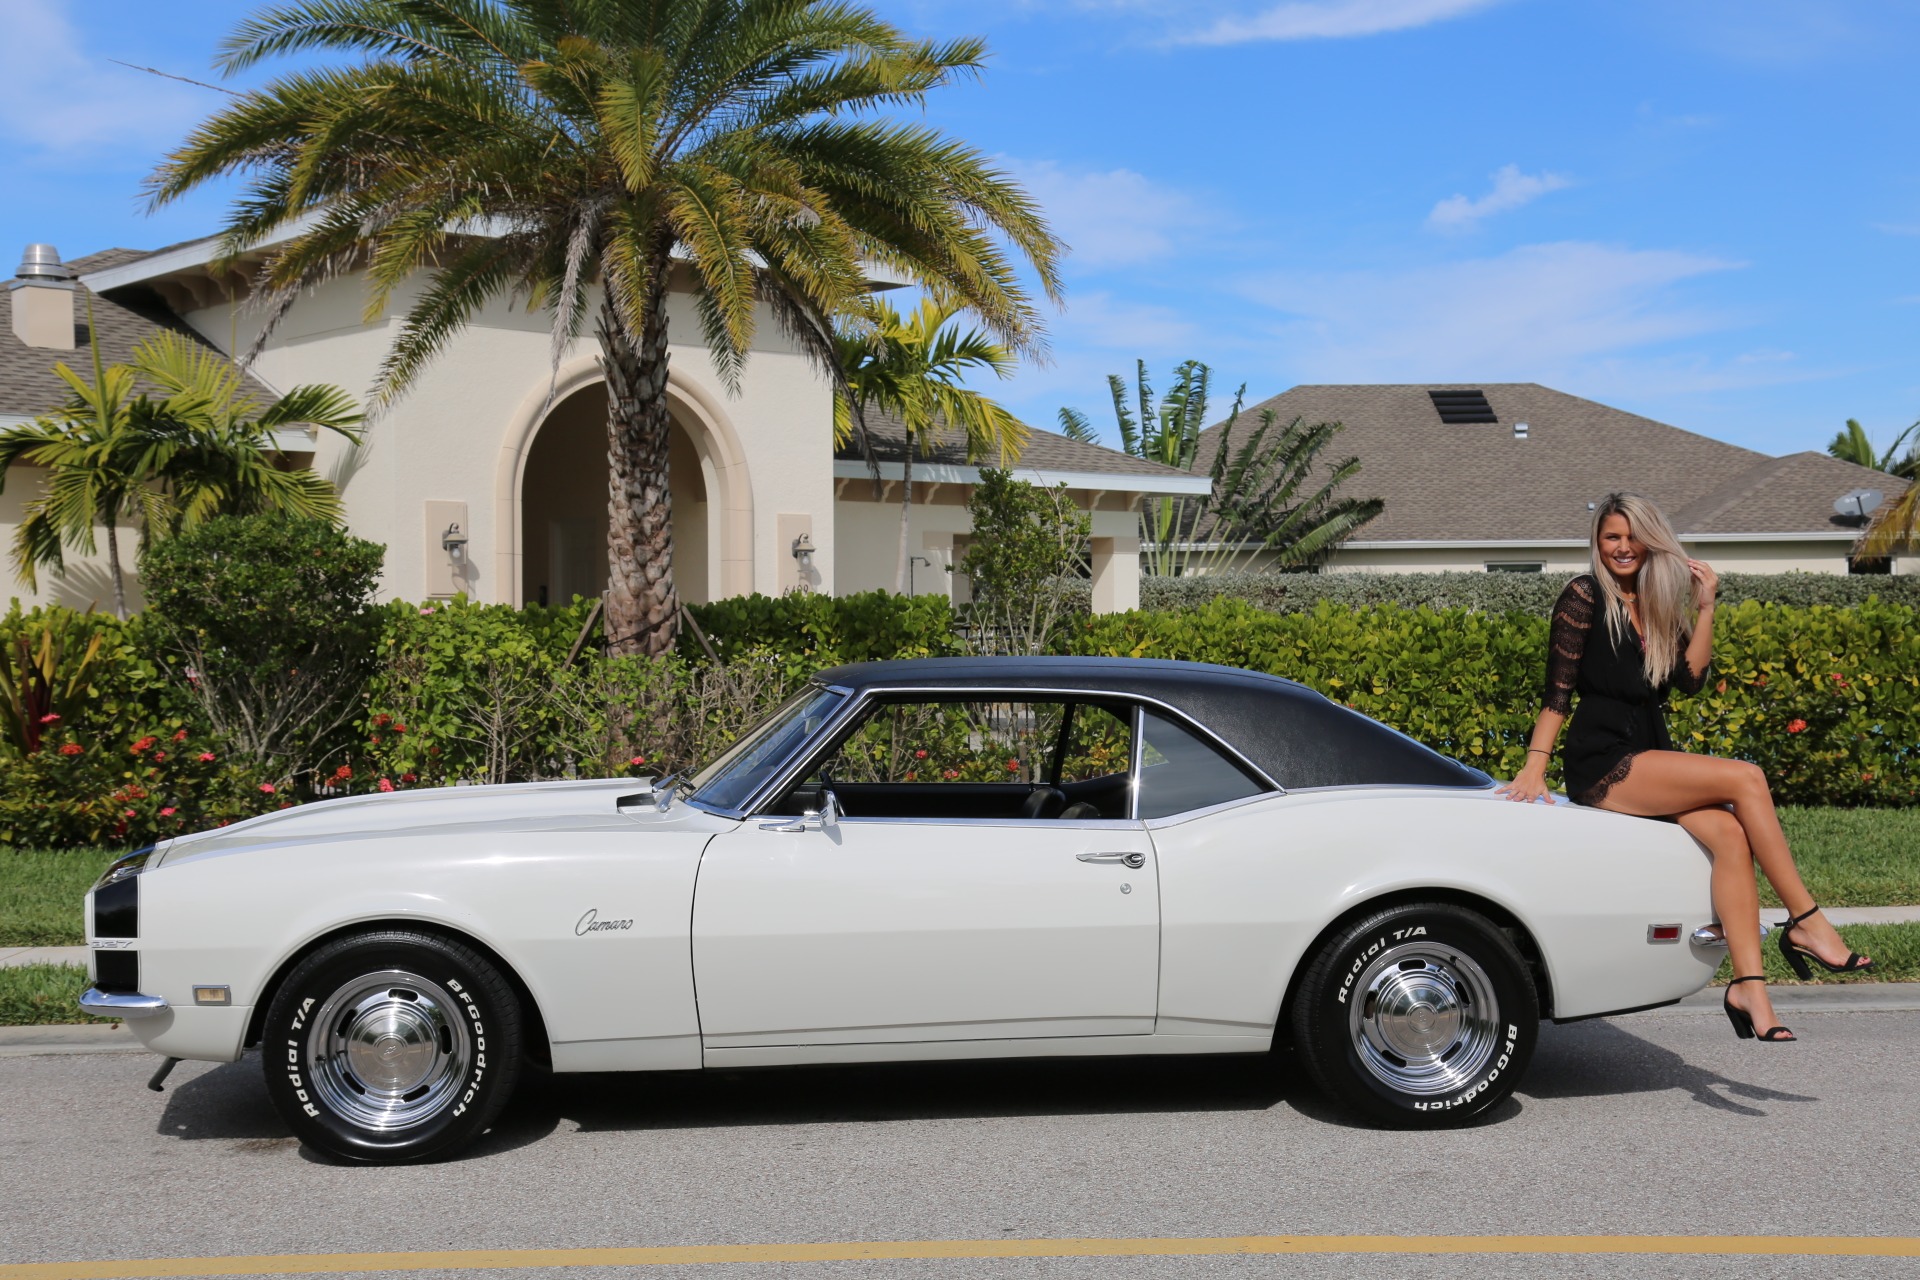 Used 1968 Chevy Camaro 327 V8 Auto # Match for sale Sold at Muscle Cars for Sale Inc. in Fort Myers FL 33912 8